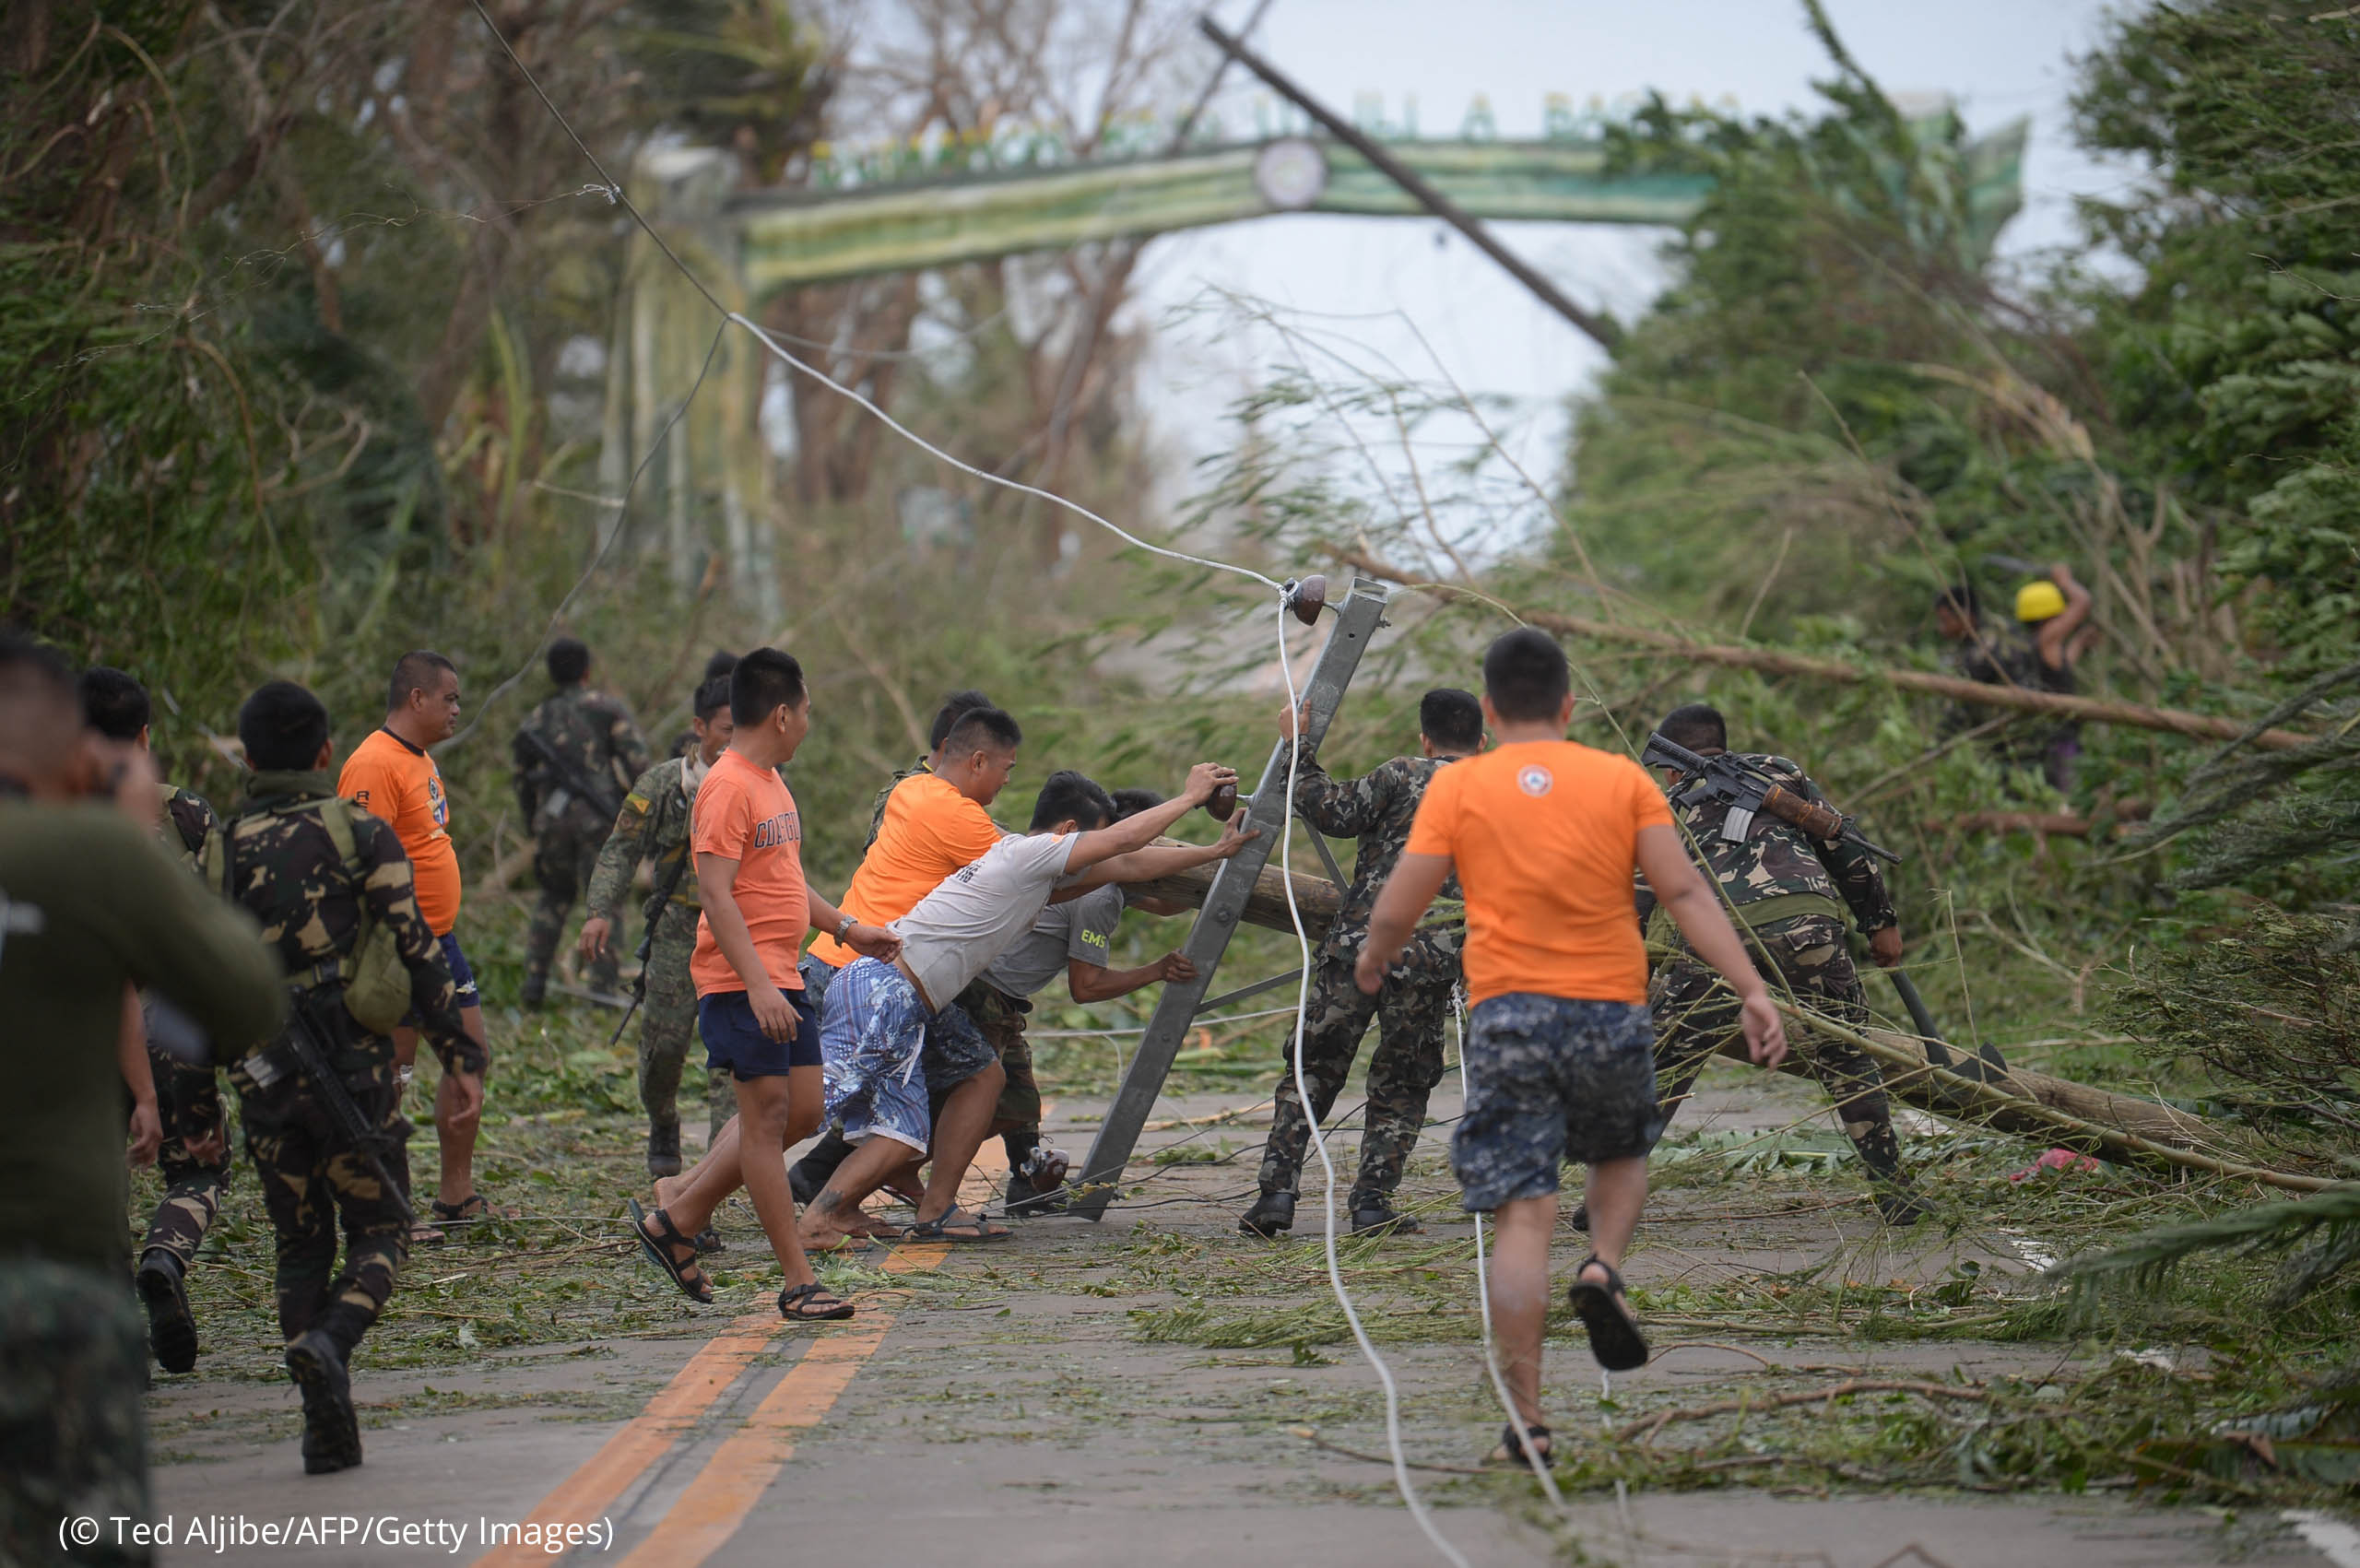 Men clearing road of debris and toppled electric posts (© Ted Aljibe/AFP/Getty Images)